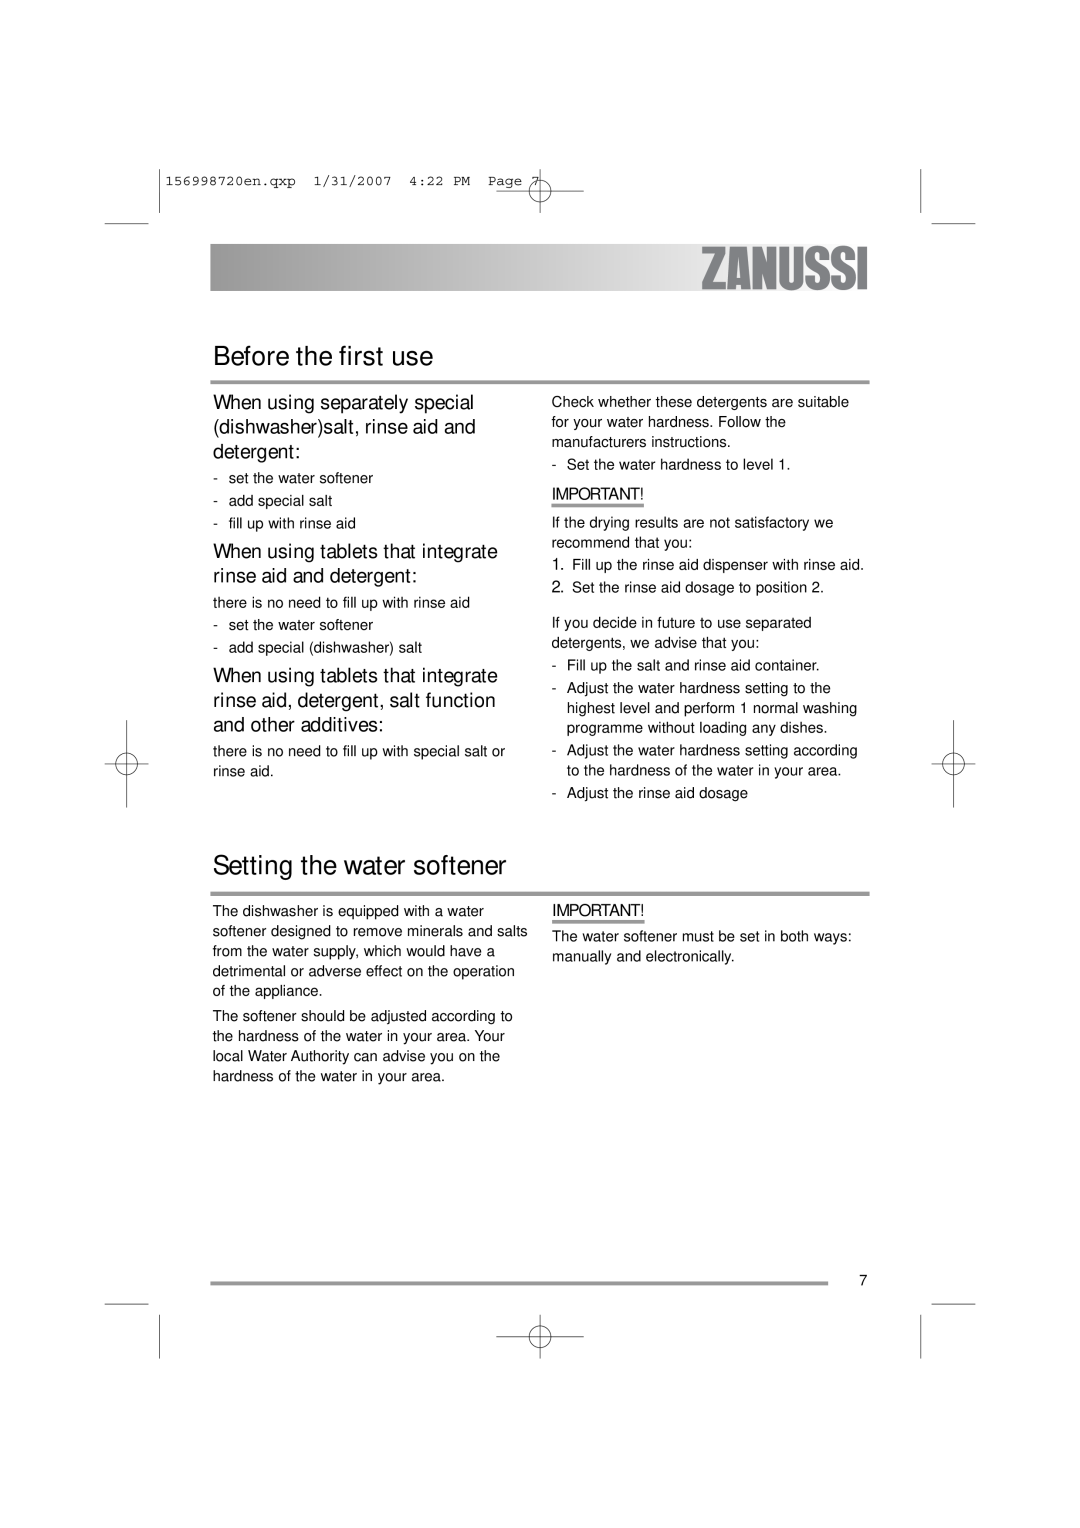 Zanussi ZDI 100 manual Before the first use, Setting the water softener 